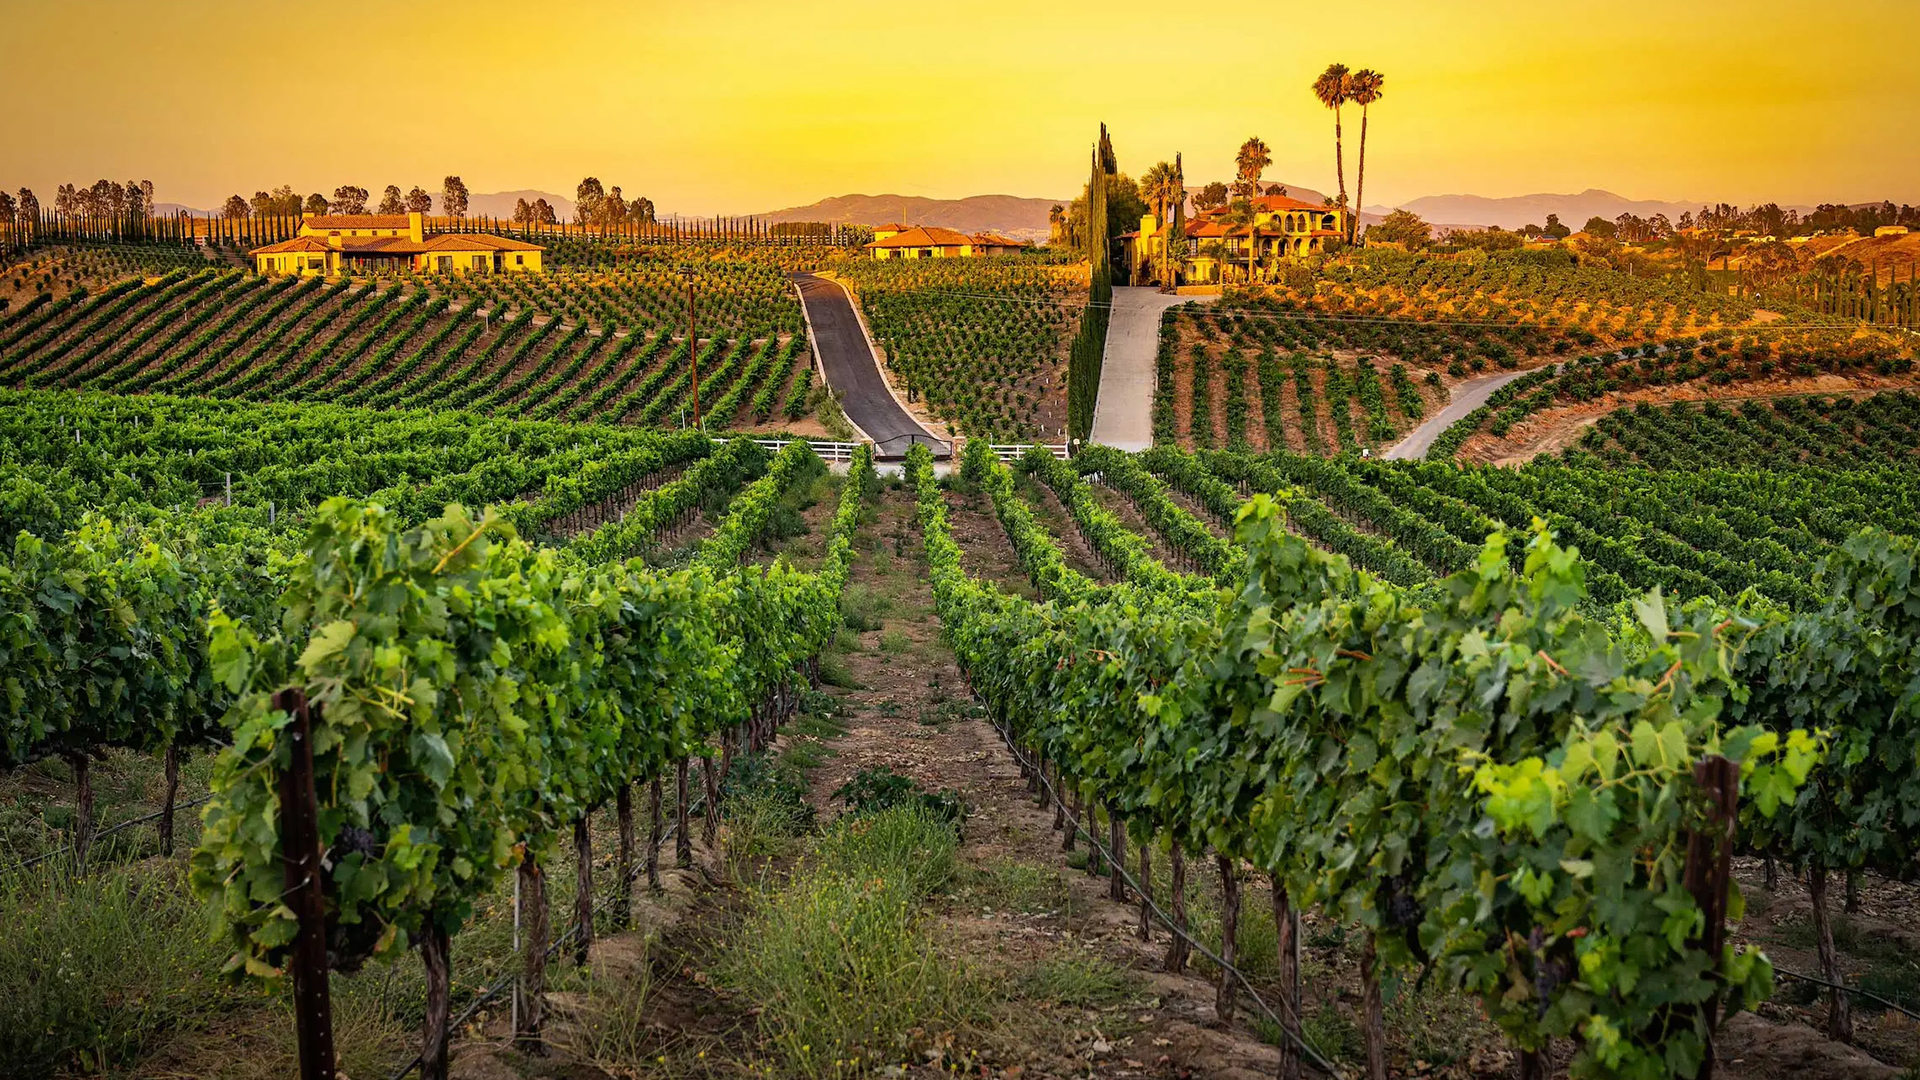 Uncover the Hidden Gem: Discover the Affordable ‘Disneyland of Wineries’ in the Heart of America’s Tuscany, Just a Short Drive from LA!